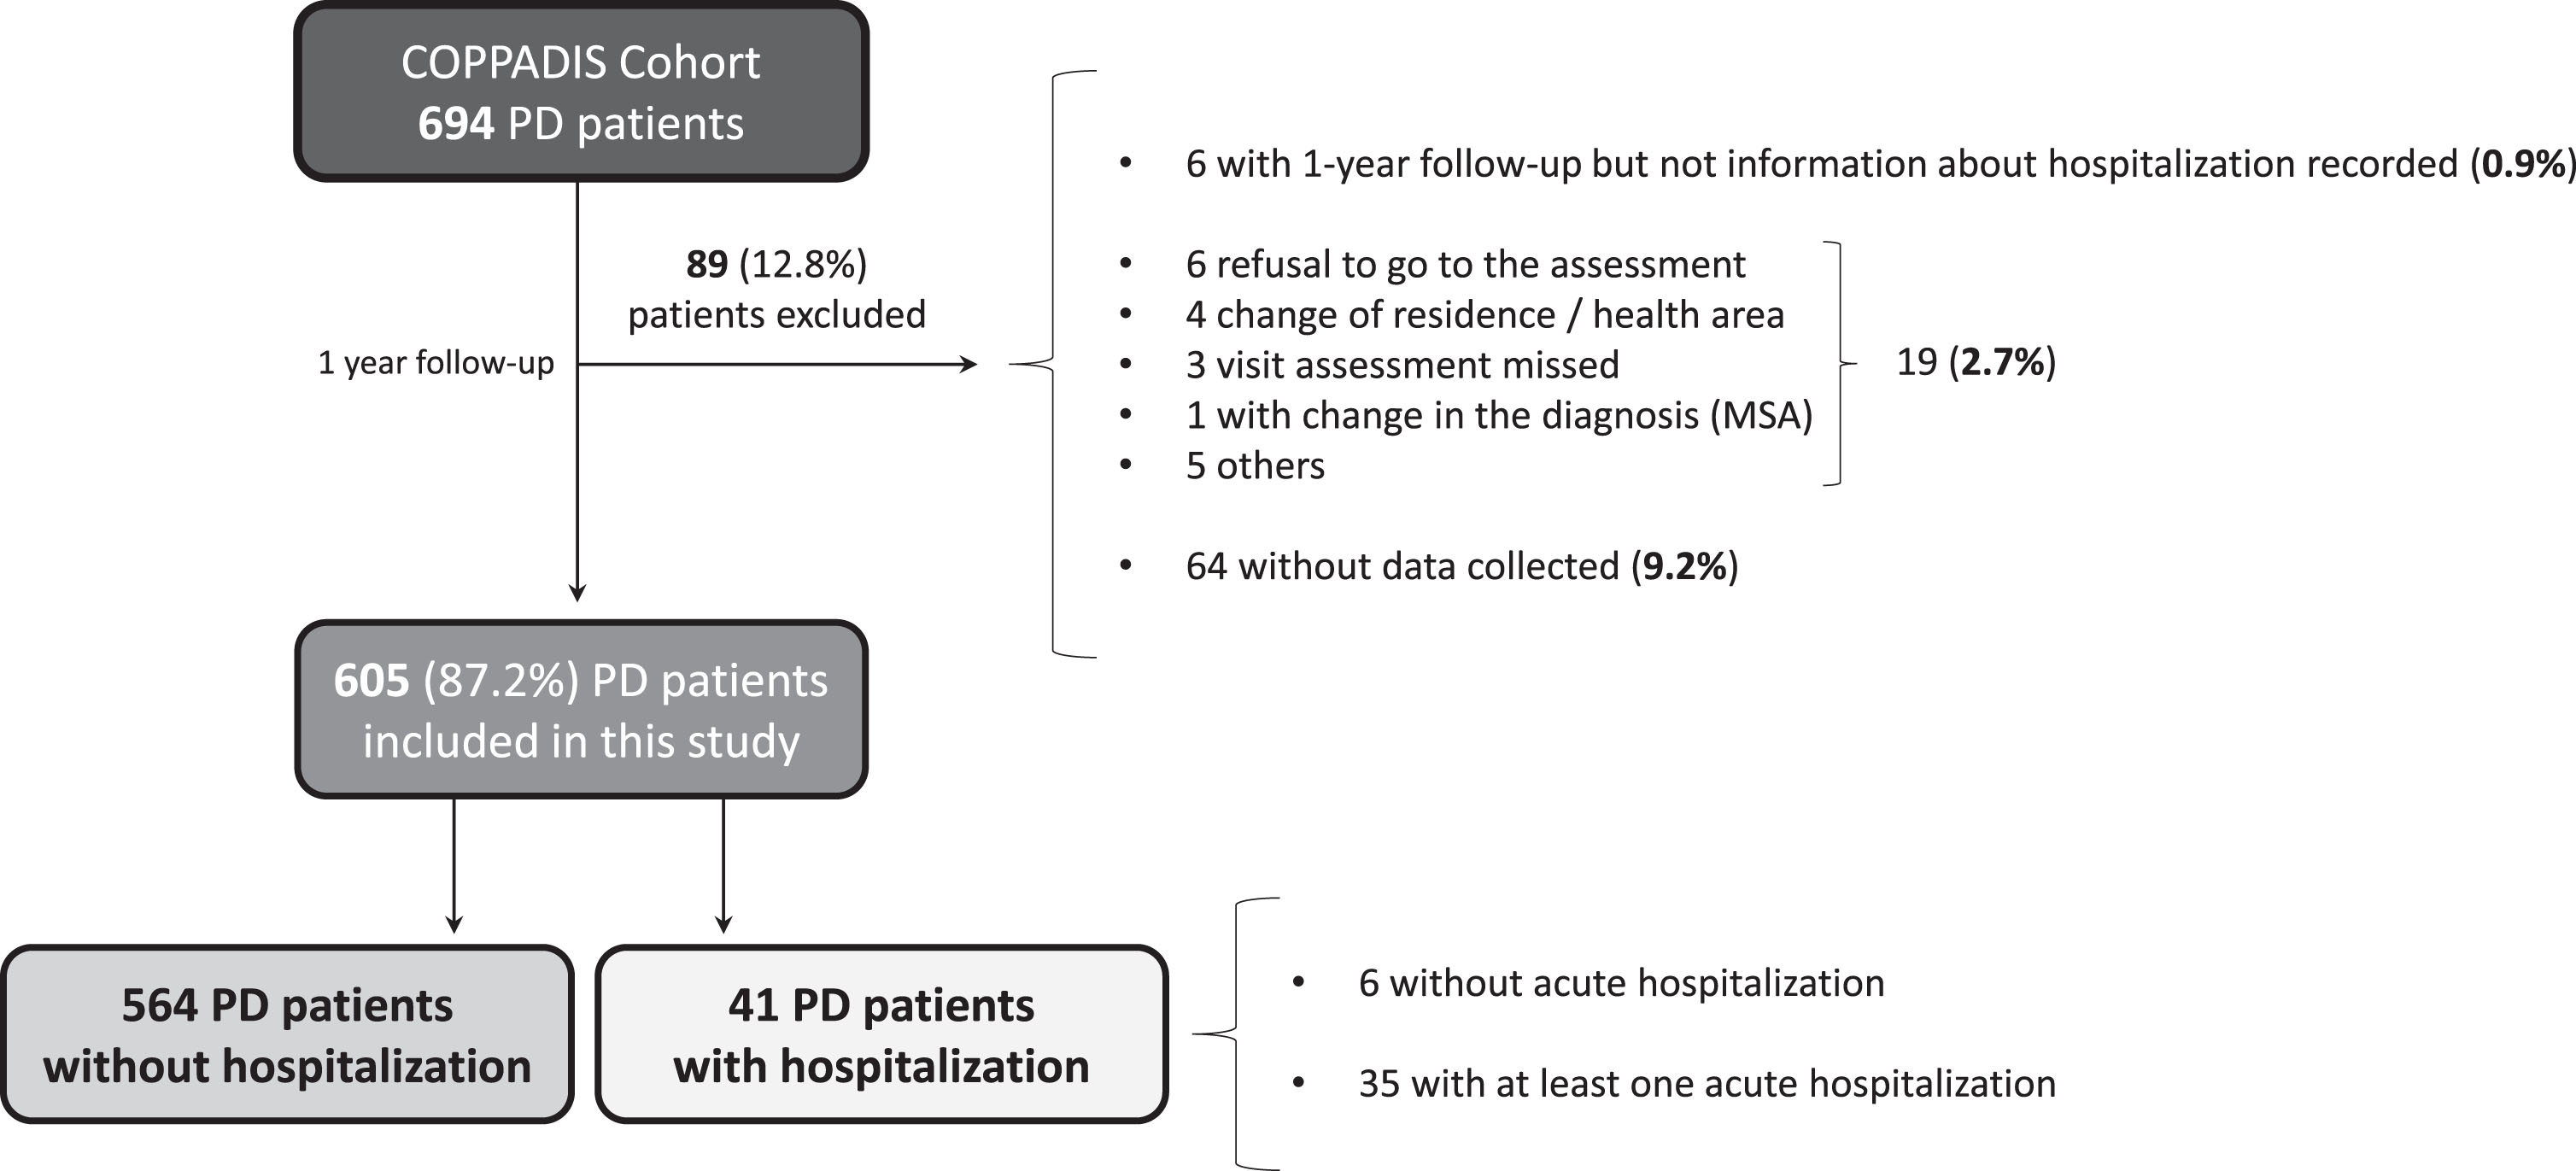 Flowchart about PD patients from the COPPADIS cohort participating in the present study. Of 594 patients, 1 patient was excluded due to change in the diagnosis (from PD to MSA) and 88 for other reasons. Of 605 patients included in the analysis, 41 (6.8%) presented at least one hospitalization (35 acute and 6 planned hospitalization). MSA, multiple system atrophy; PD, Parkinson’s disease.